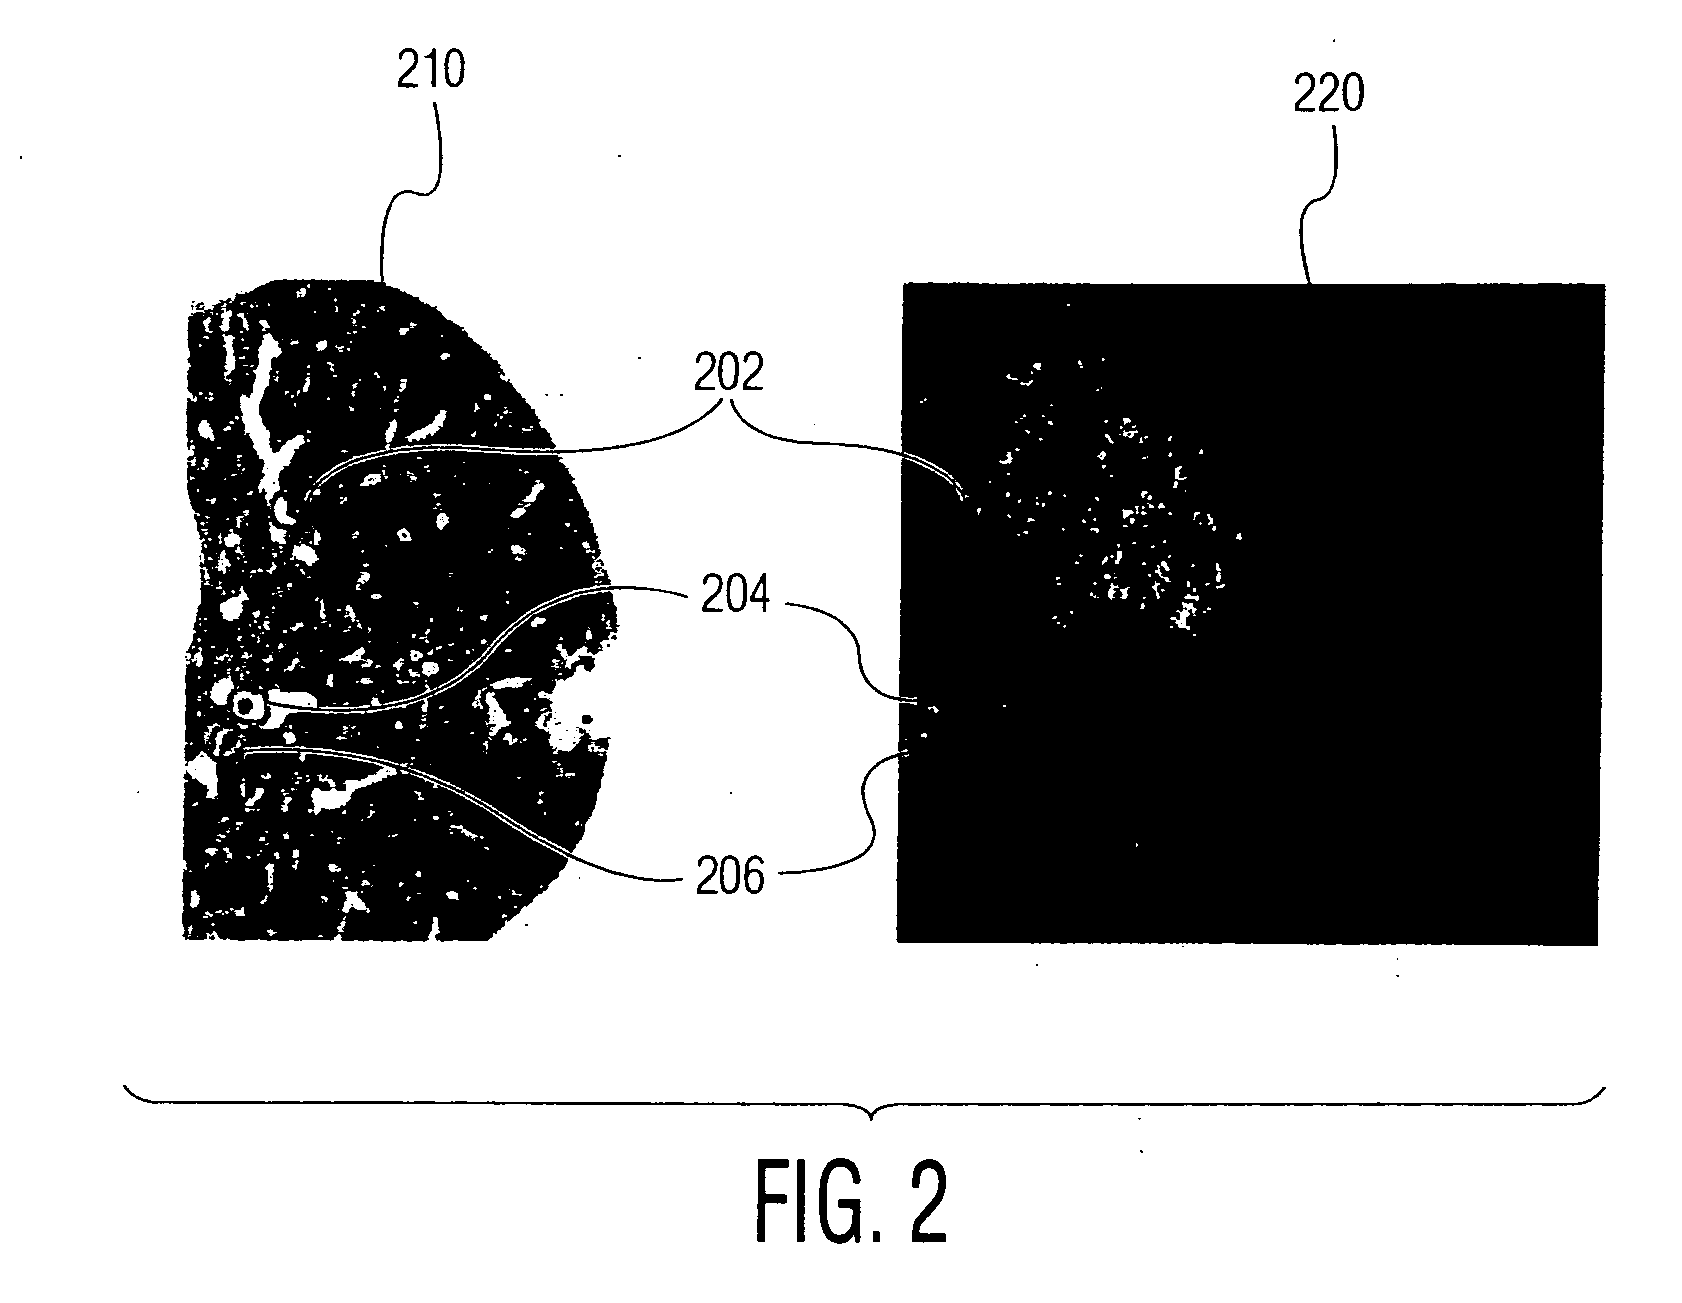 System and method for airway detection